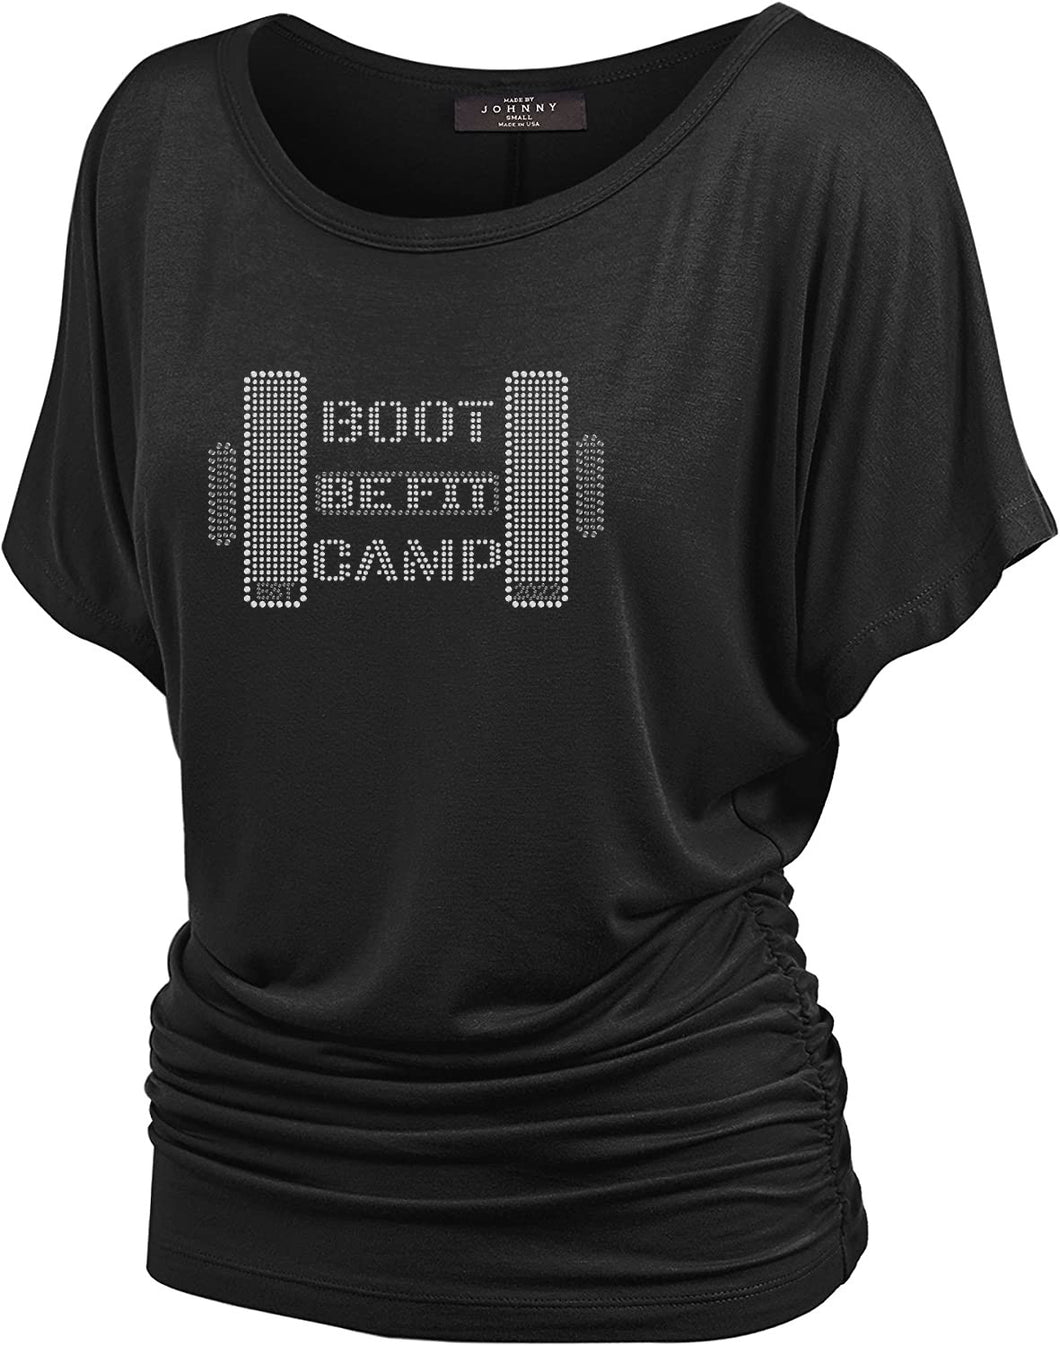 BE FIT BOOTCAMP | BLING BUSINESS CASUAL Women's Dolman Top Short Sleeve